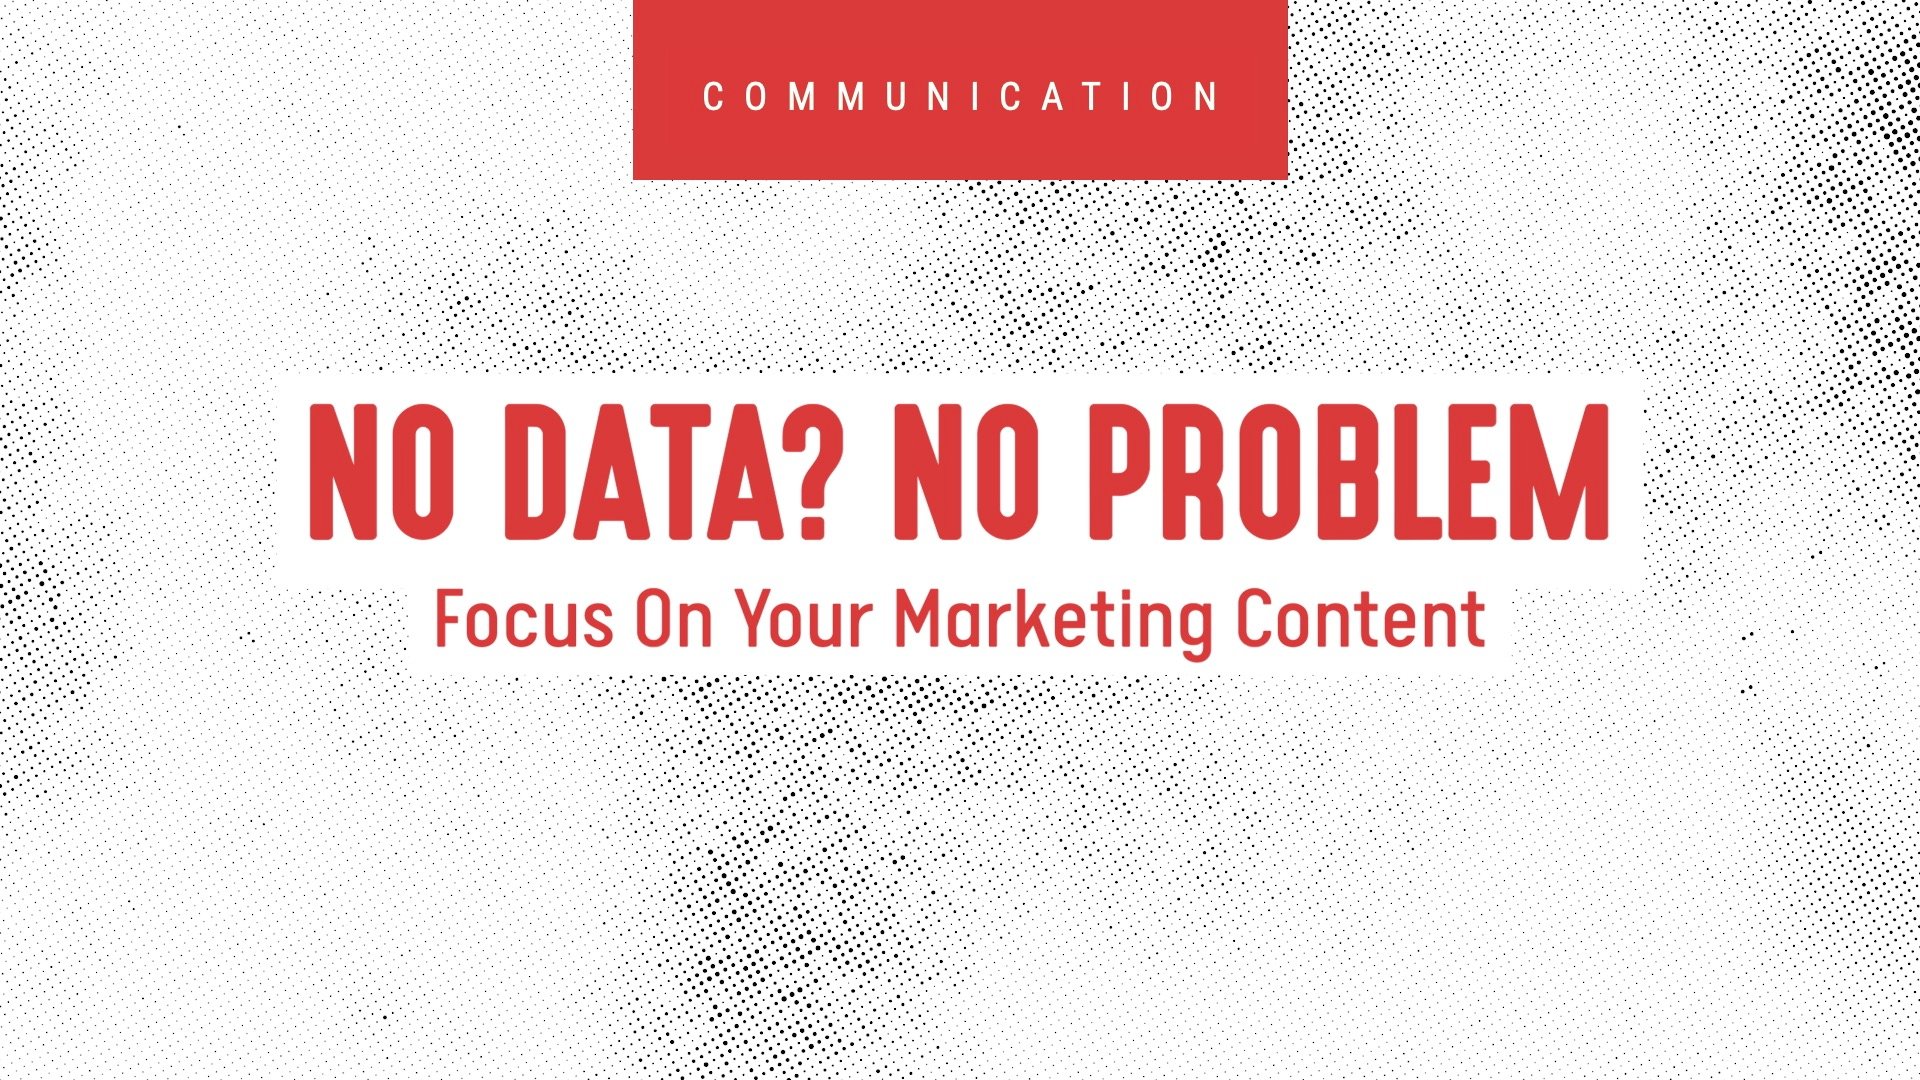 Do Privacy Changes Affect Your Marketing’s Effectiveness?